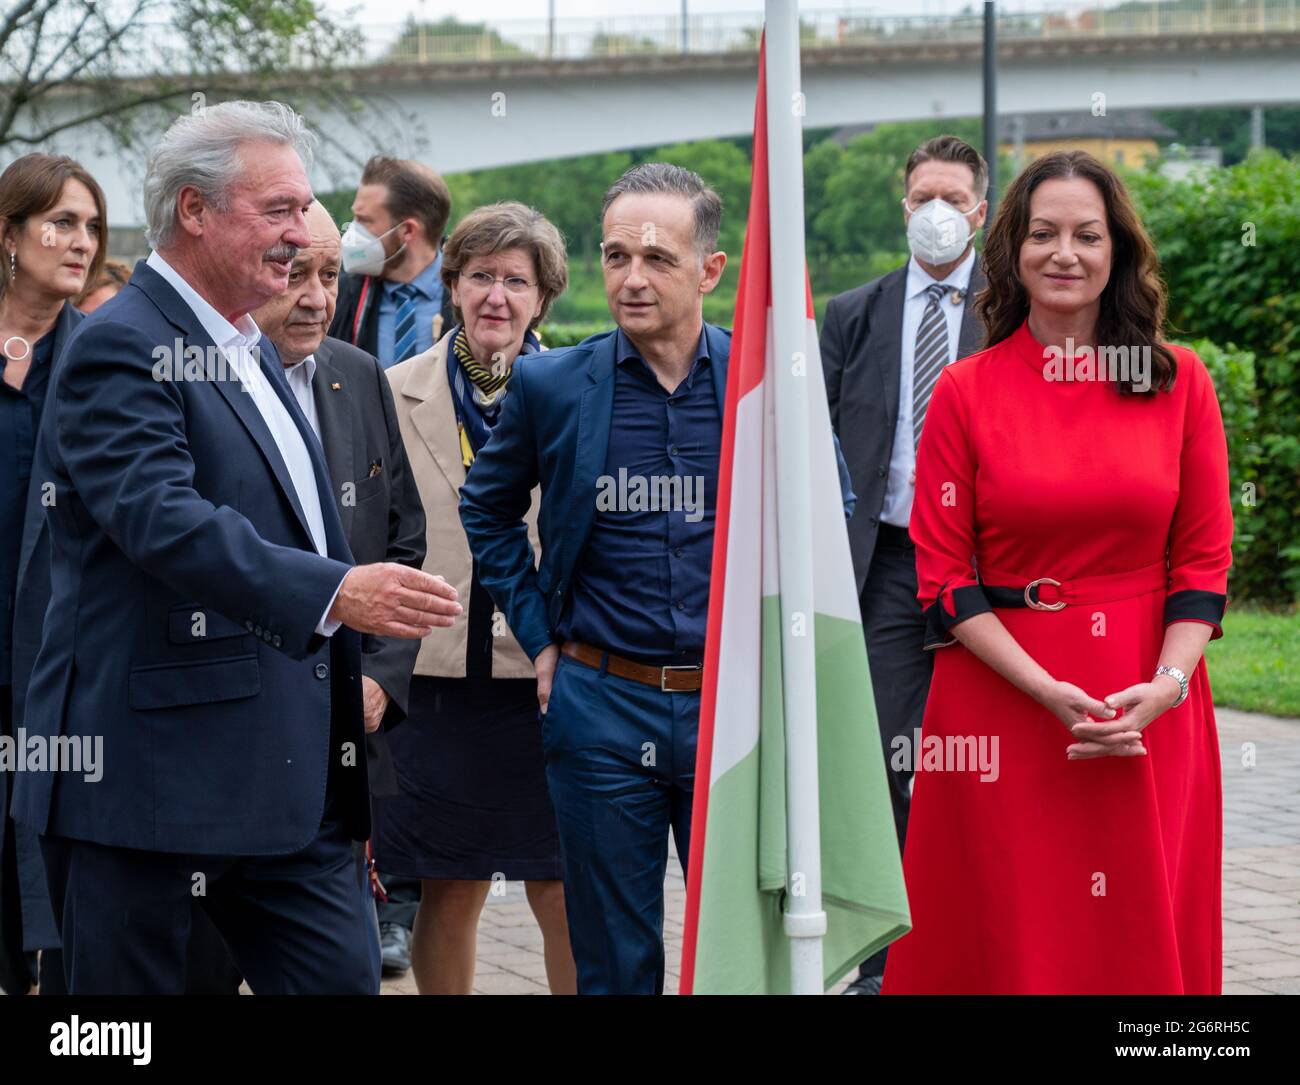 Schengen, Luxembourg. 08th July, 2021. Foreign Ministers Jean Asselborn  (l-r, Luxembourg), Jean-Yves Le Drian (France) and Heiko Maas (Germany,  SPD) discuss in front of the Schengen Museum in the presence of actress